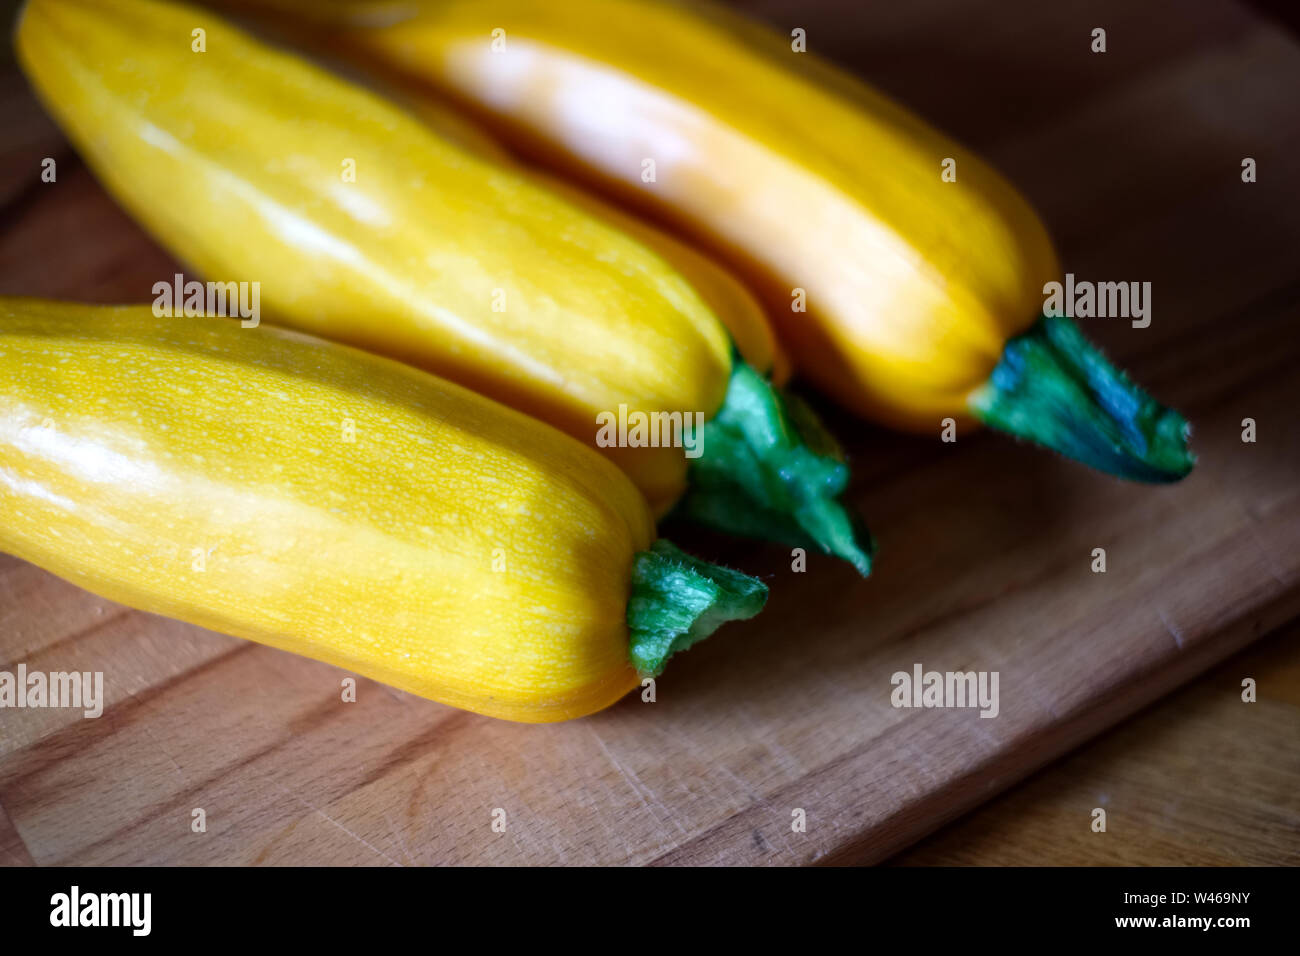 Yellow courgettes on a wooden board Stock Photo